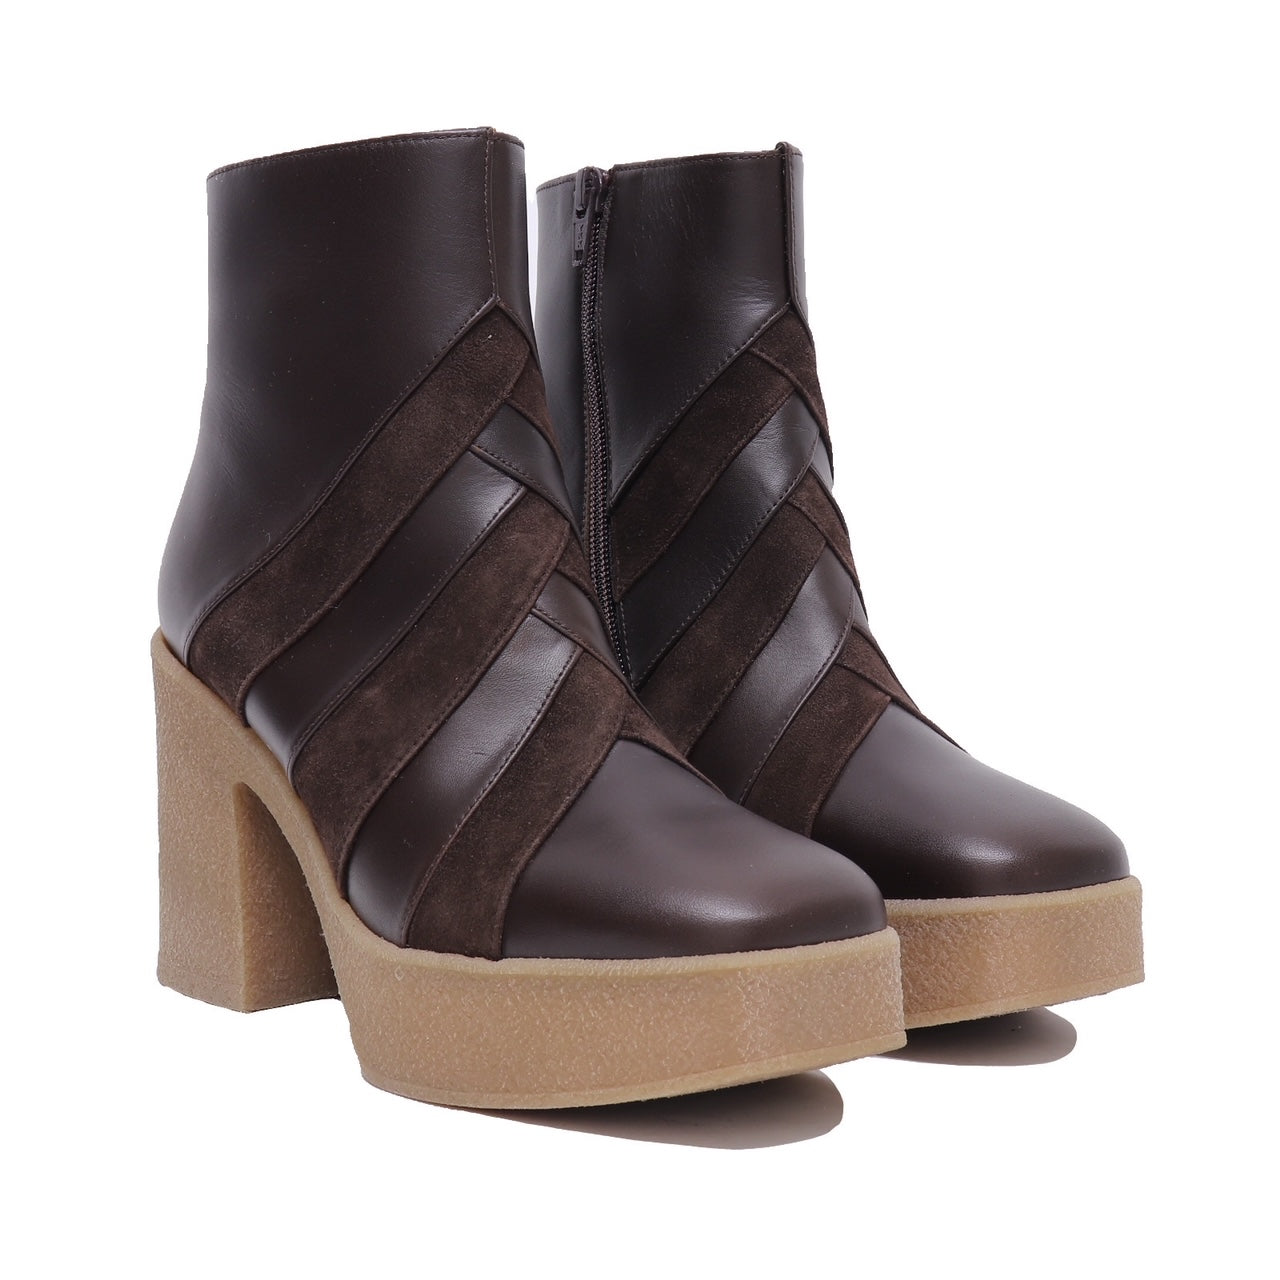 Chie Mihara Lagalet ankle boot